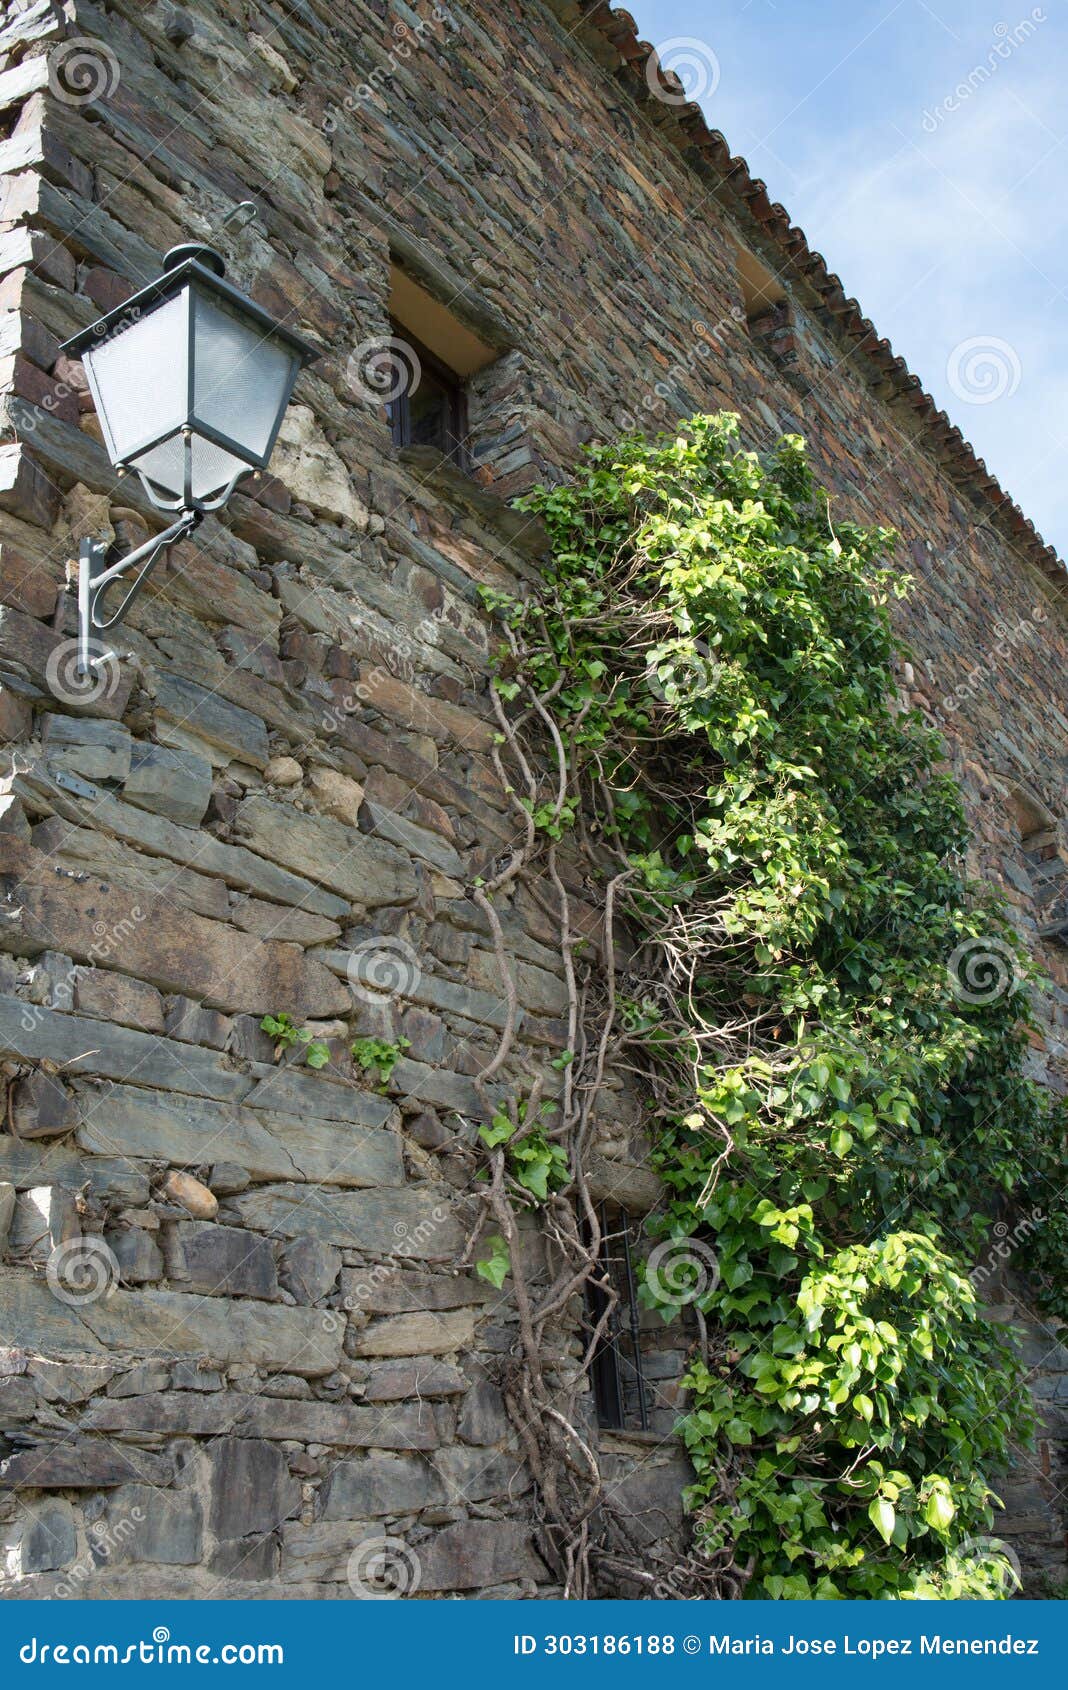 traditional stone house with climbing plant. patones de arriba, madrid